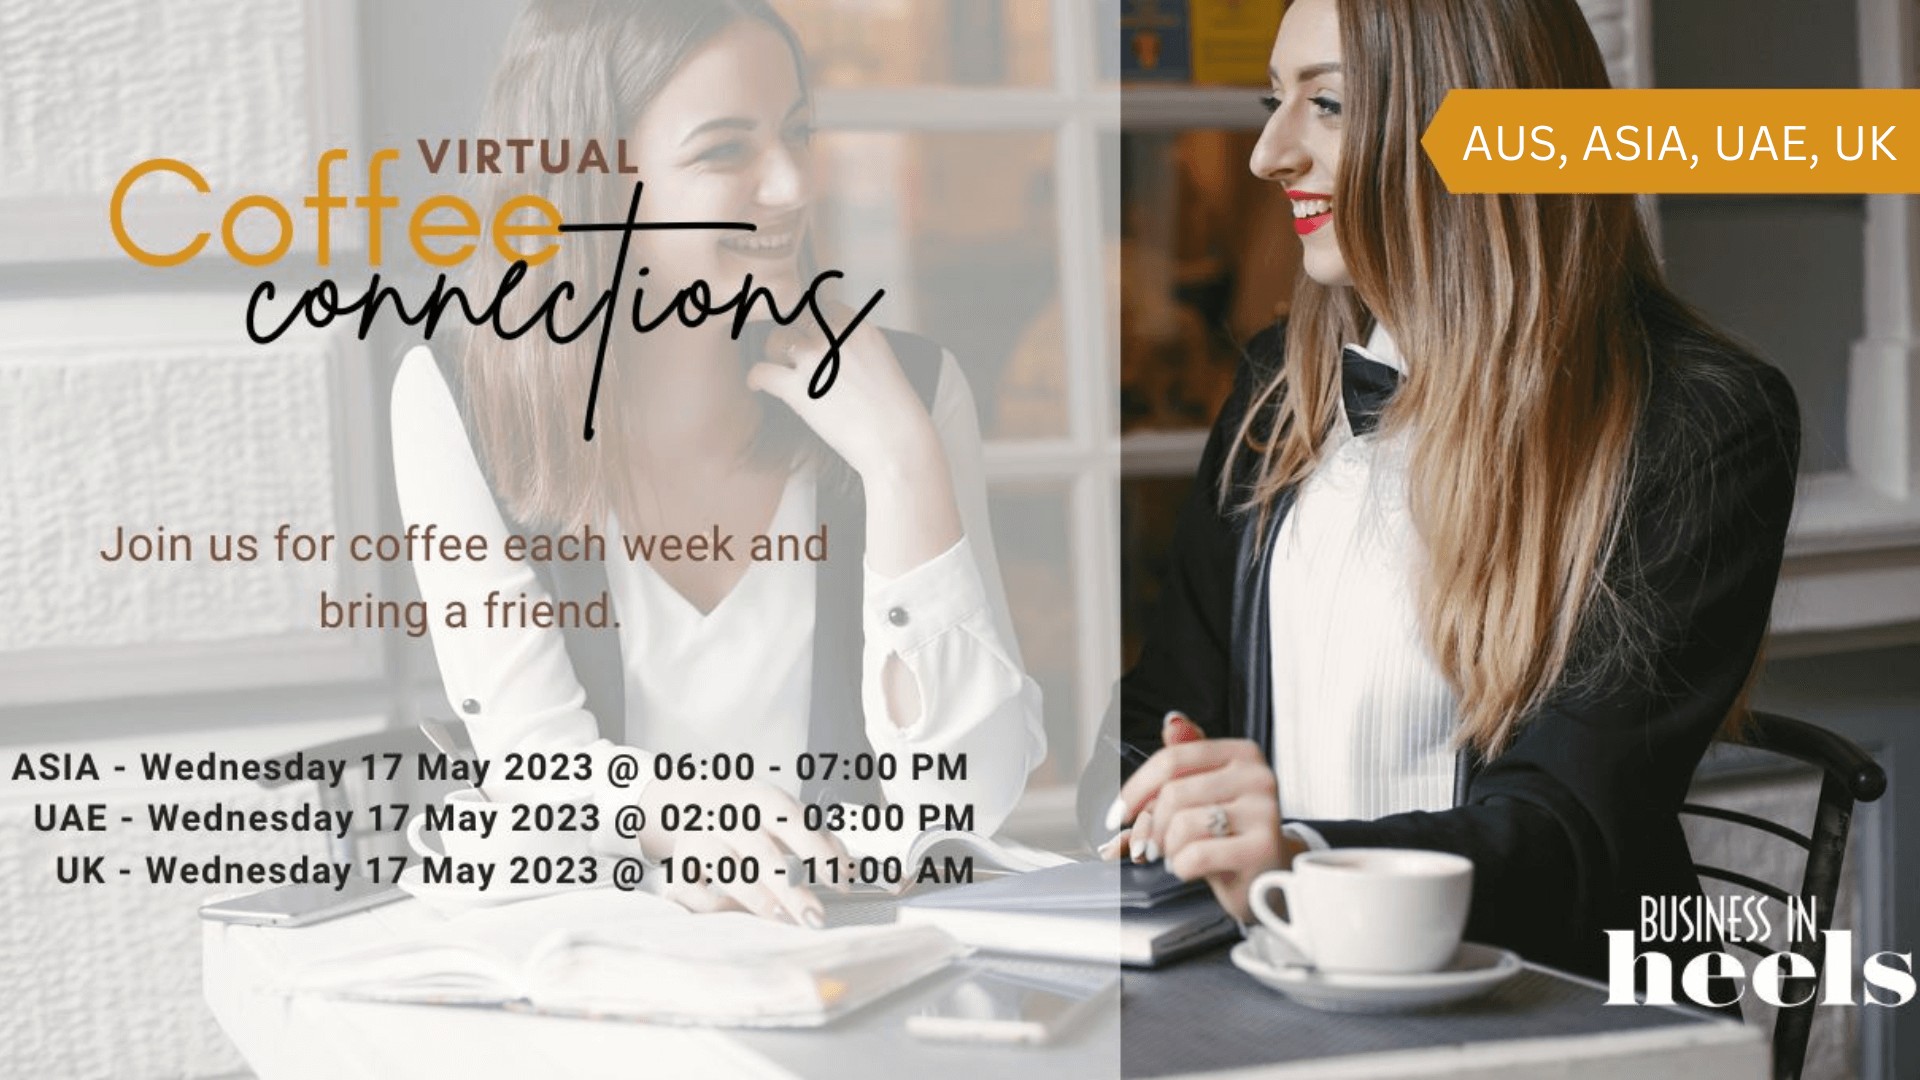 Virtual Coffee Connections - Aust/Asia/UAE/UK - 17/05/2022